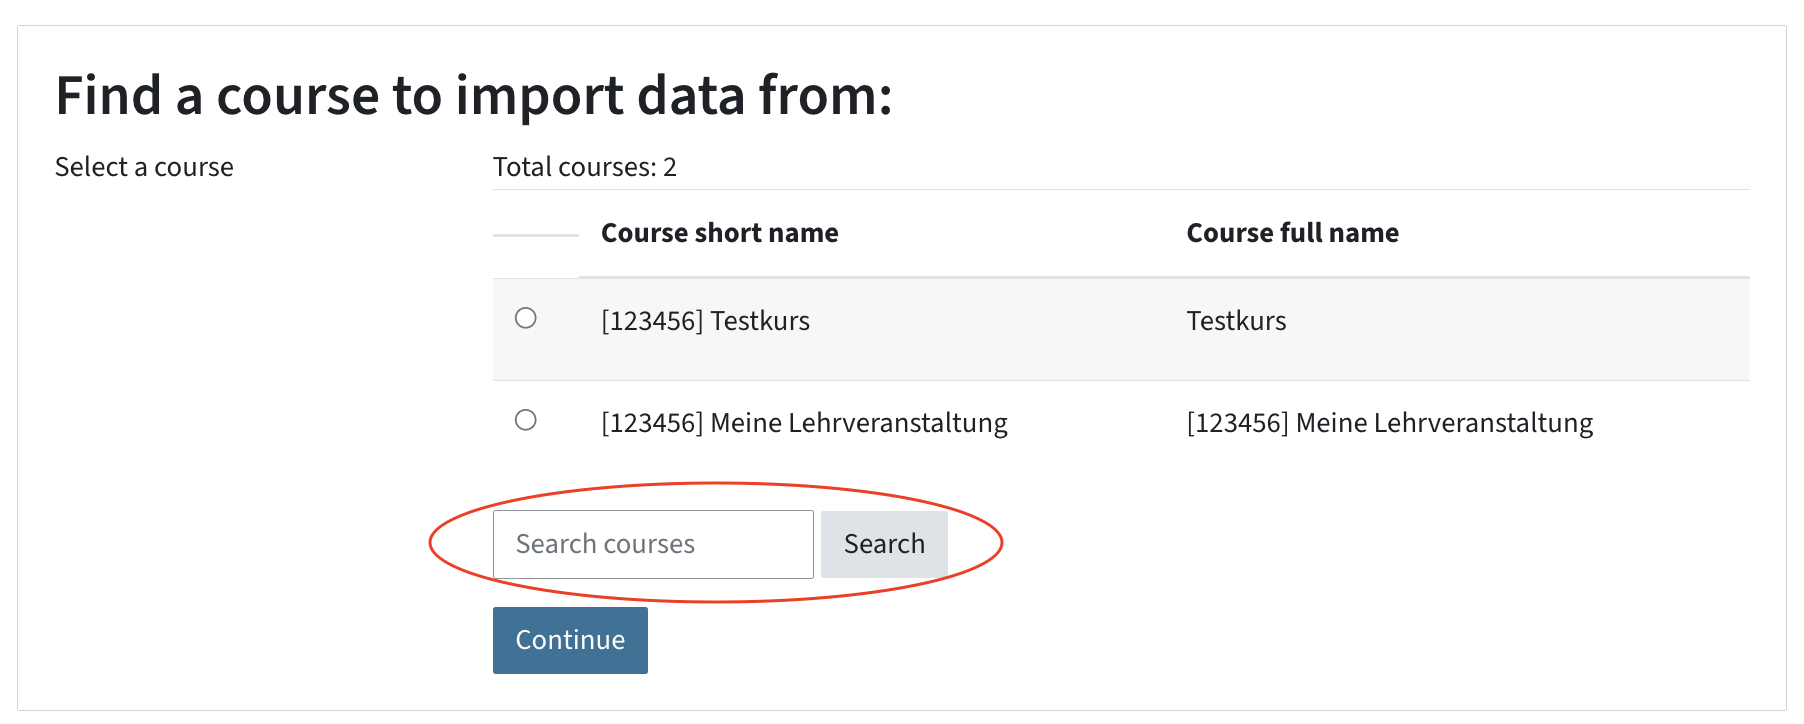 Search field to search courses; above the list of possible source courses